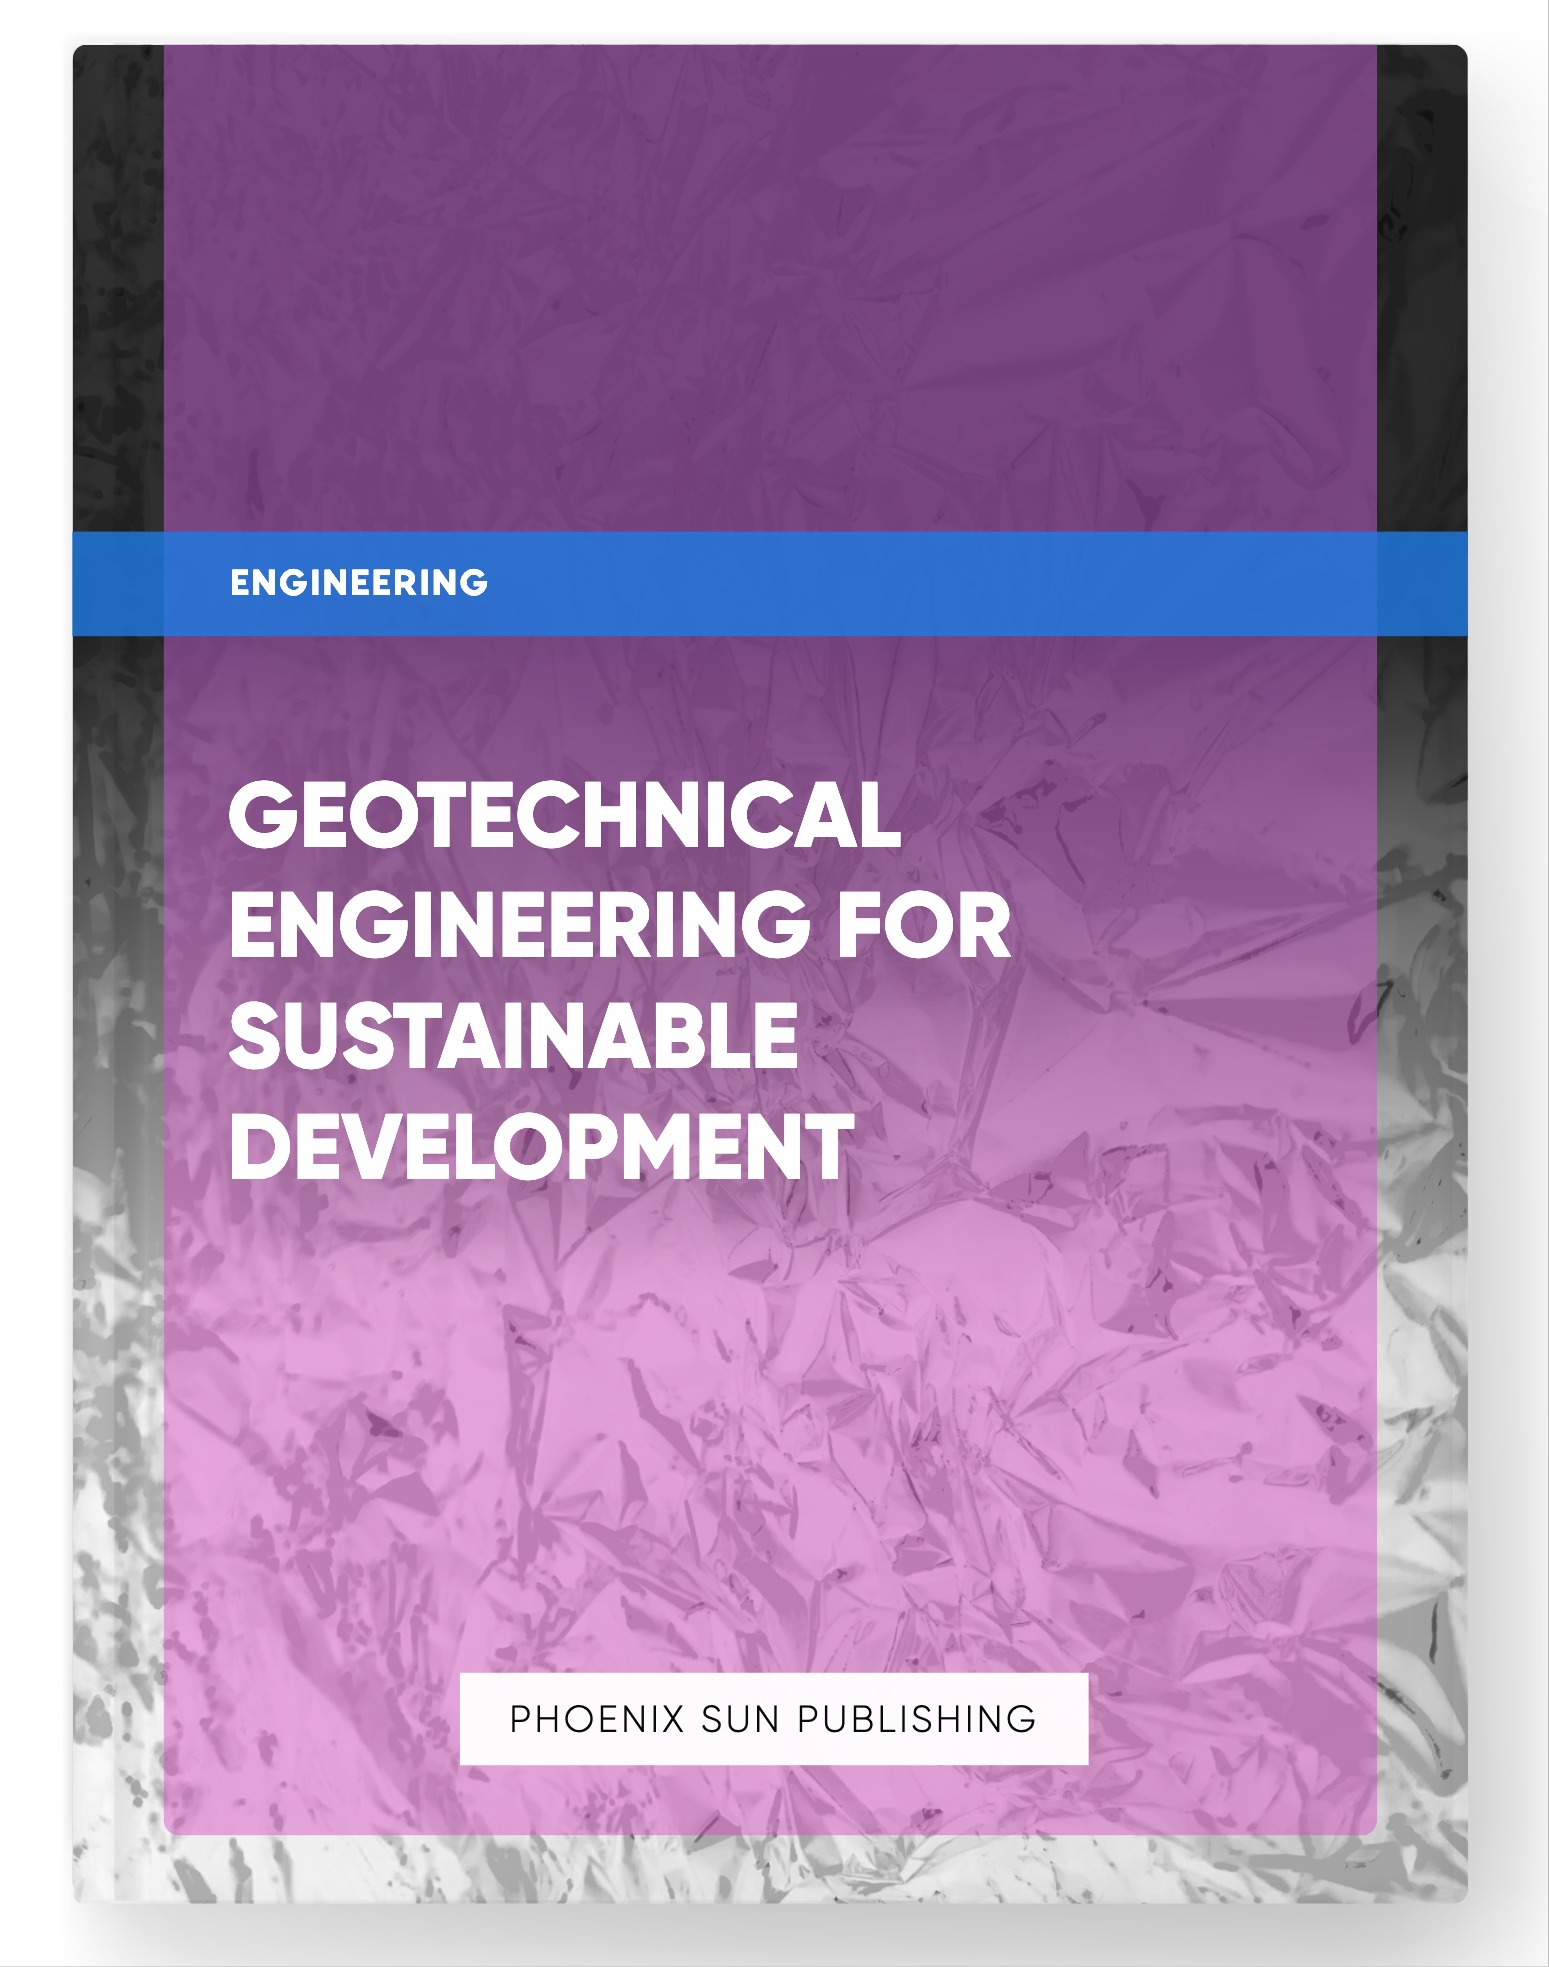 Geotechnical Engineering for Sustainable Development